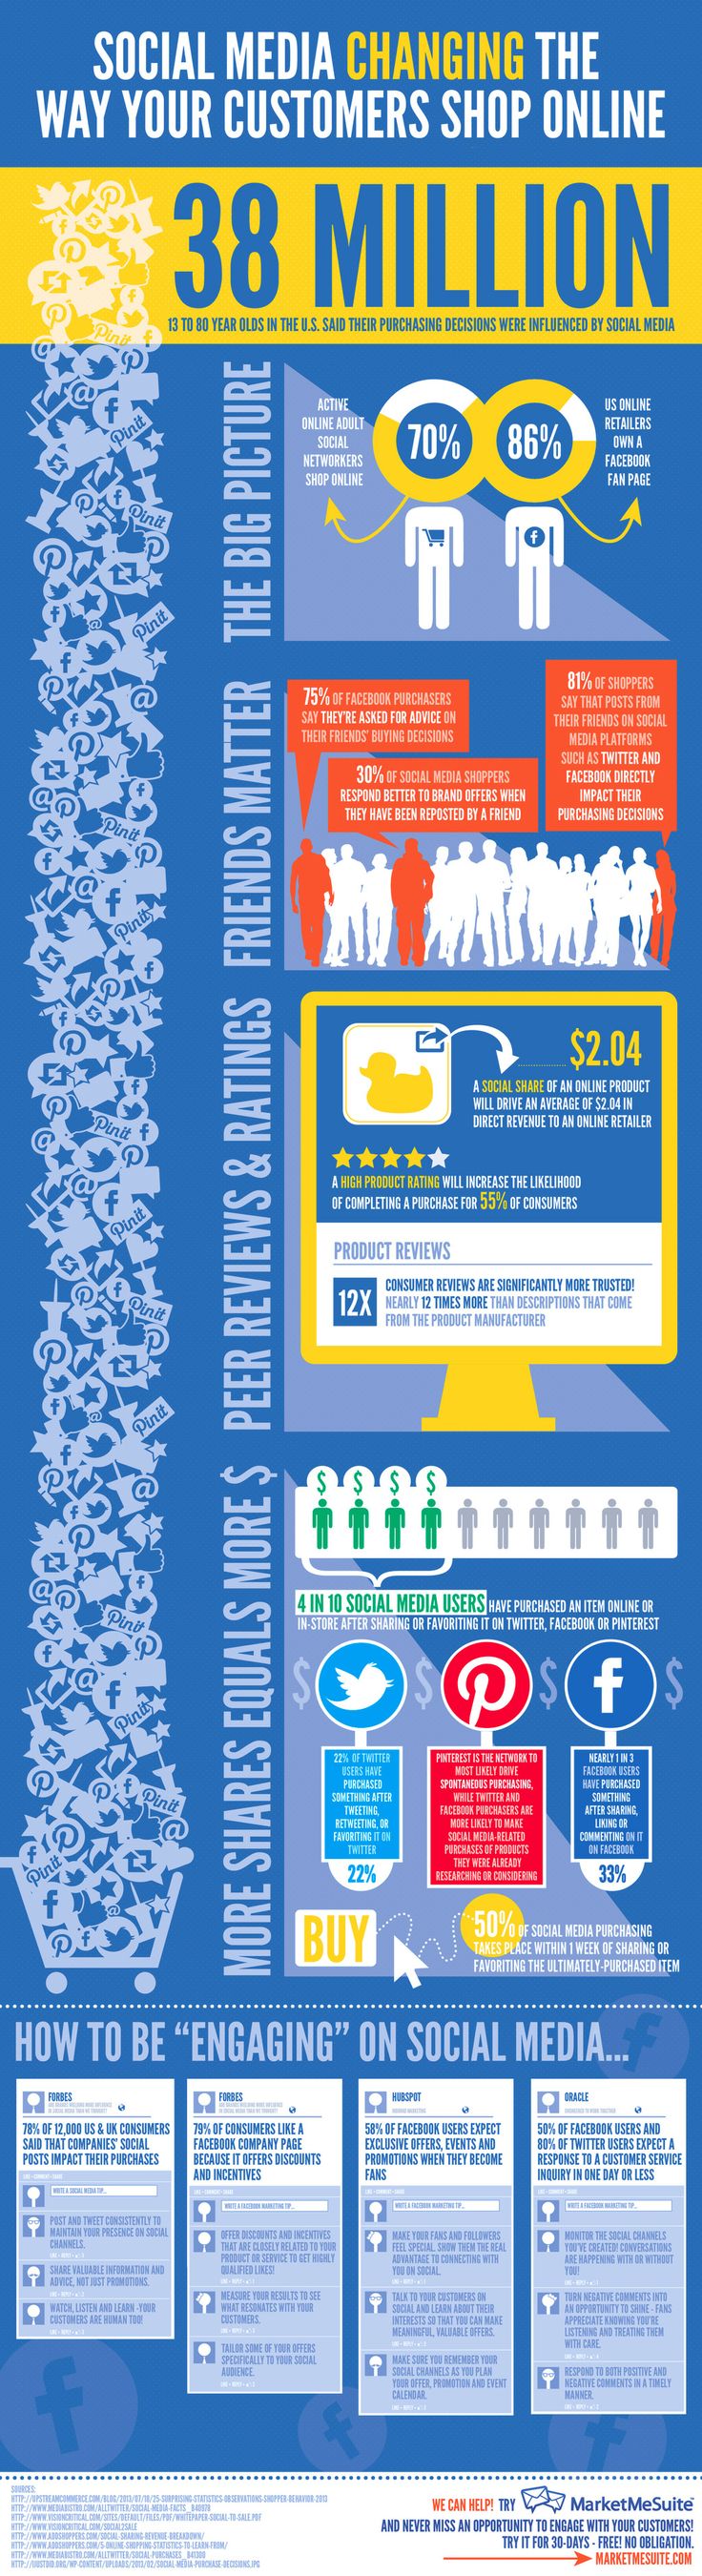 social sharing and ecommerce infographic clarity